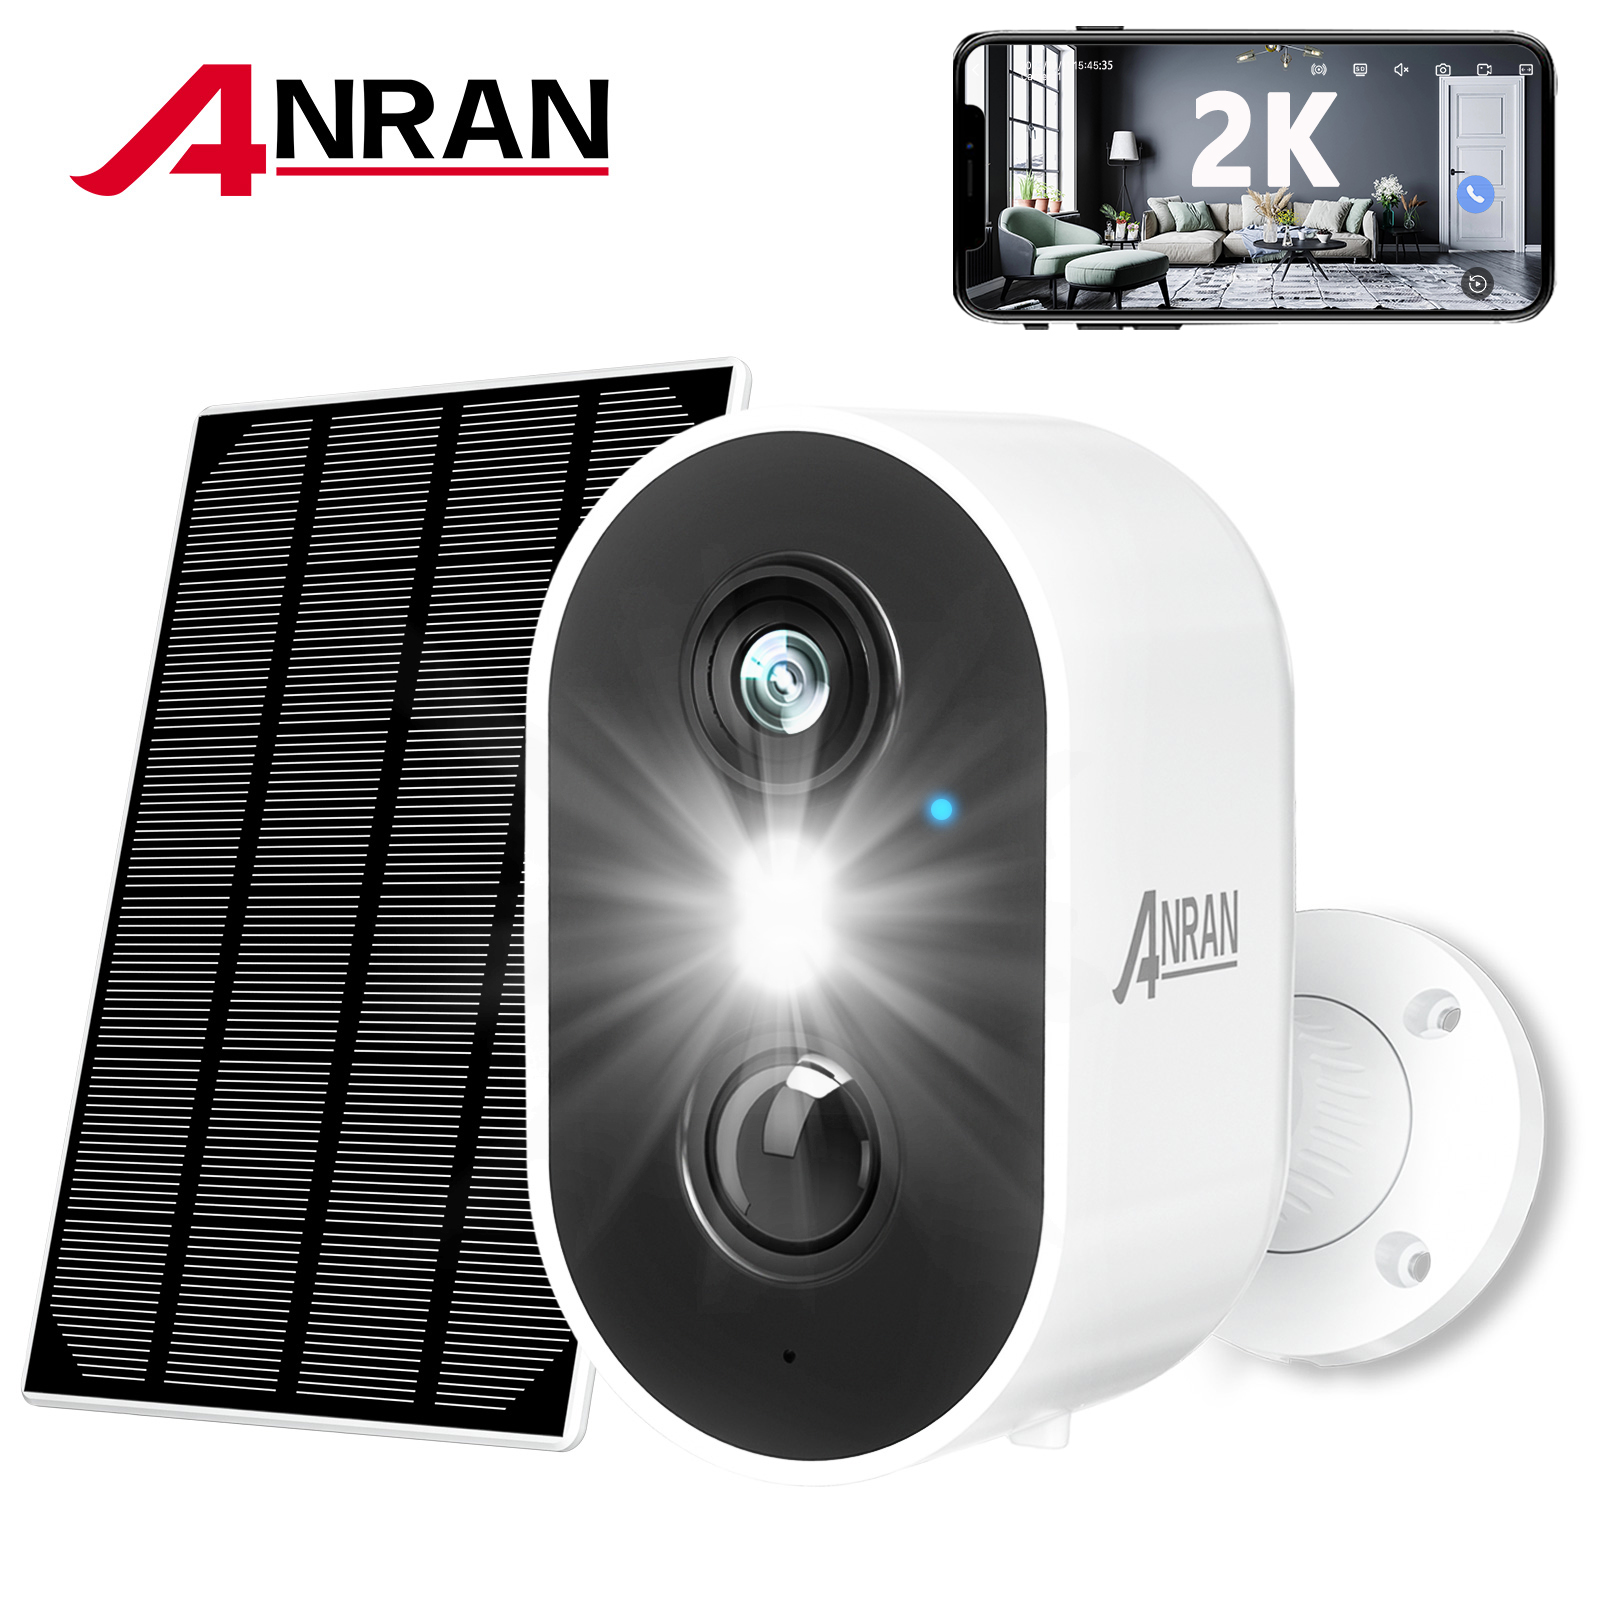 ANRAN 2K Wireless Outdoor Solar Security Camera with Spotlight, Waterproof PIR Detection, 2.4Ghz Wi-Fi, Rechargeable Battery Powered Home Surveillance Camera with Color Night Vision, 2-Way Audio - image 2 of 10